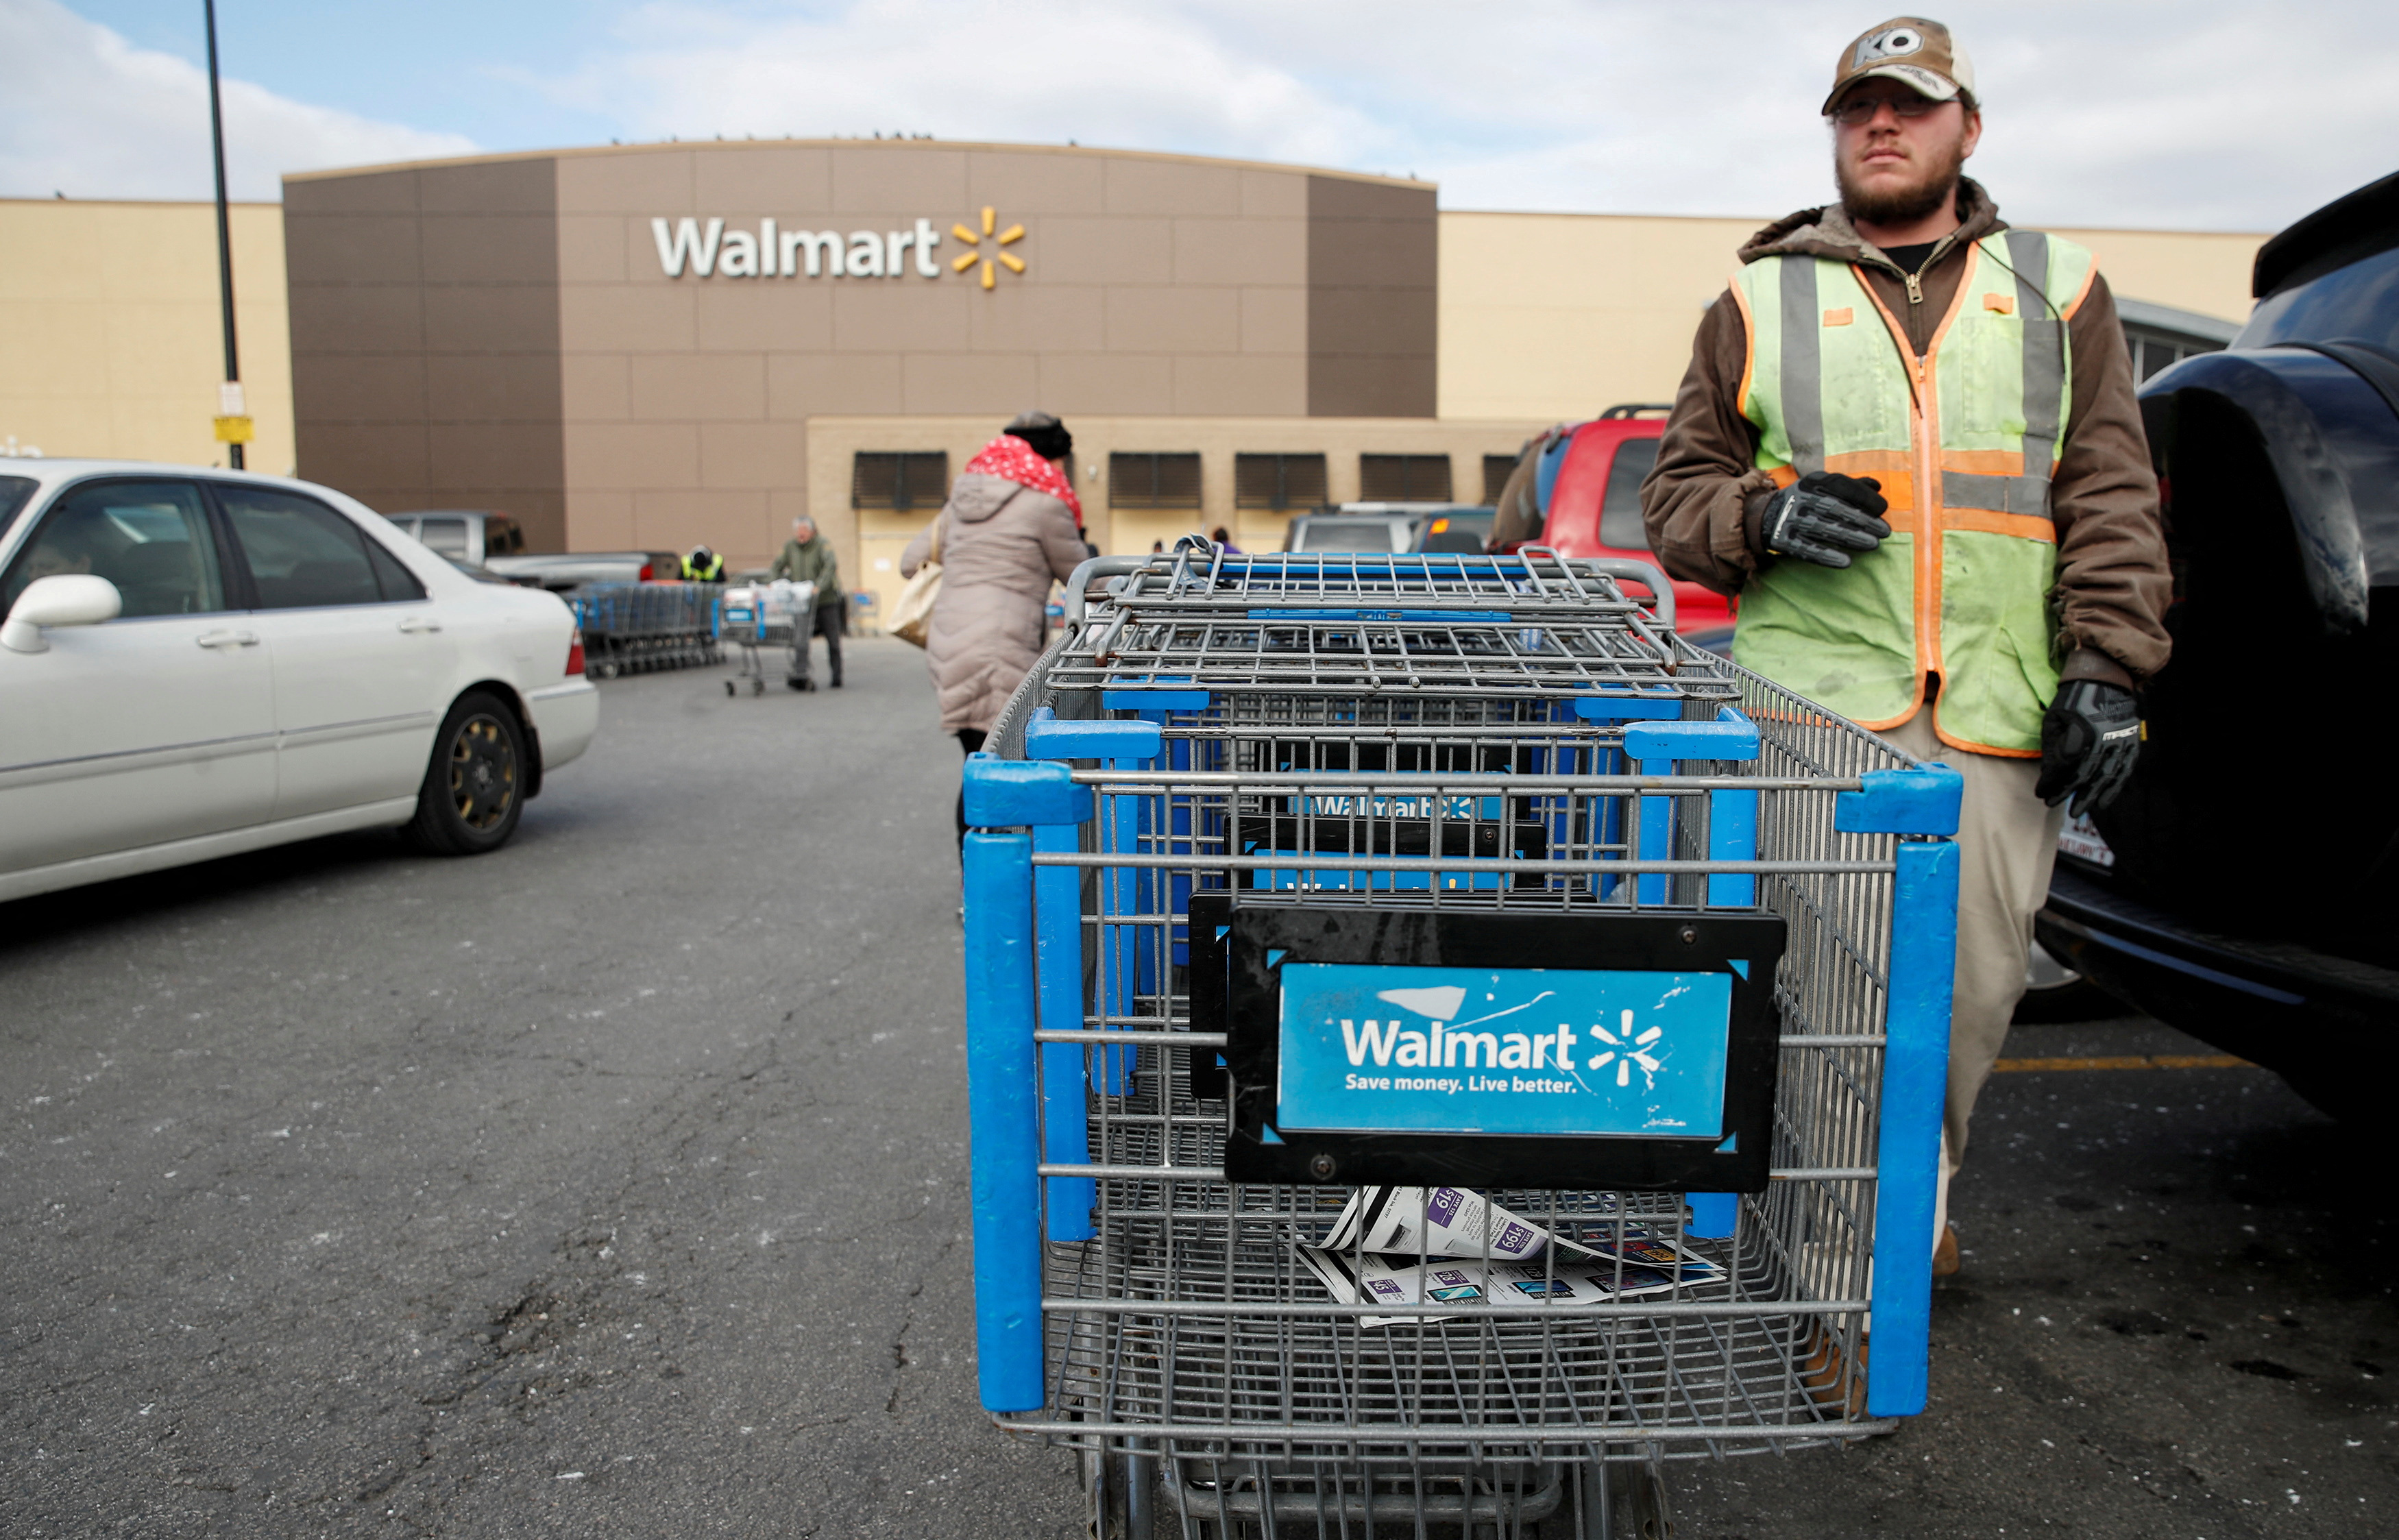 Walmart Draws More Shoppers, Helping to Bolster the Economy - The